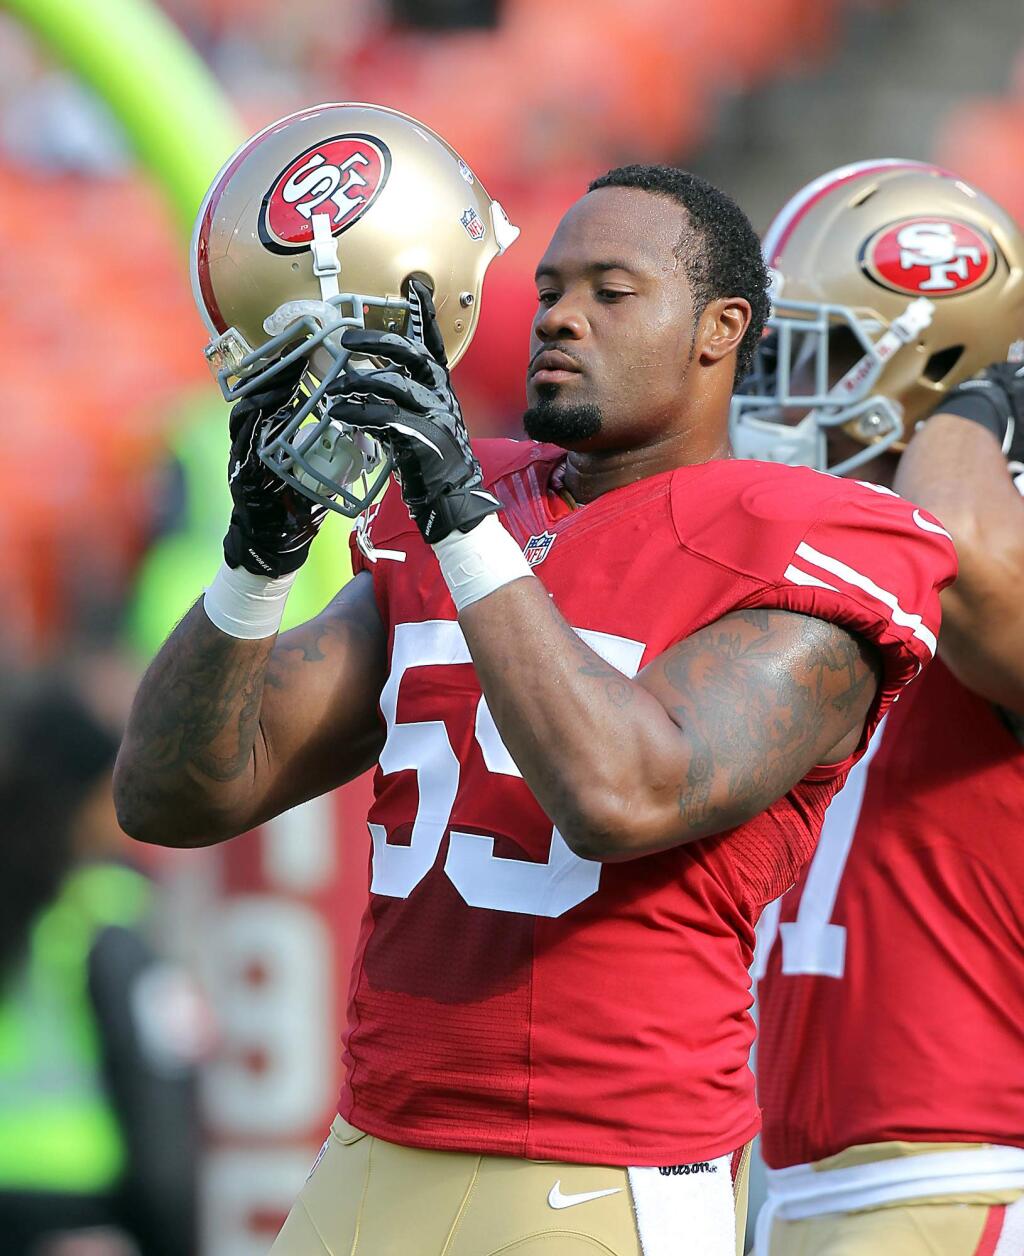 8/11/2013: C1: 49ers linebacker Ahmad Brooks assaulted a teammate, but refuses to discuss the incident. PC: San Francisco 49ers linebacker Ahmad Brooks. (John Burgess/The Press Democrat)